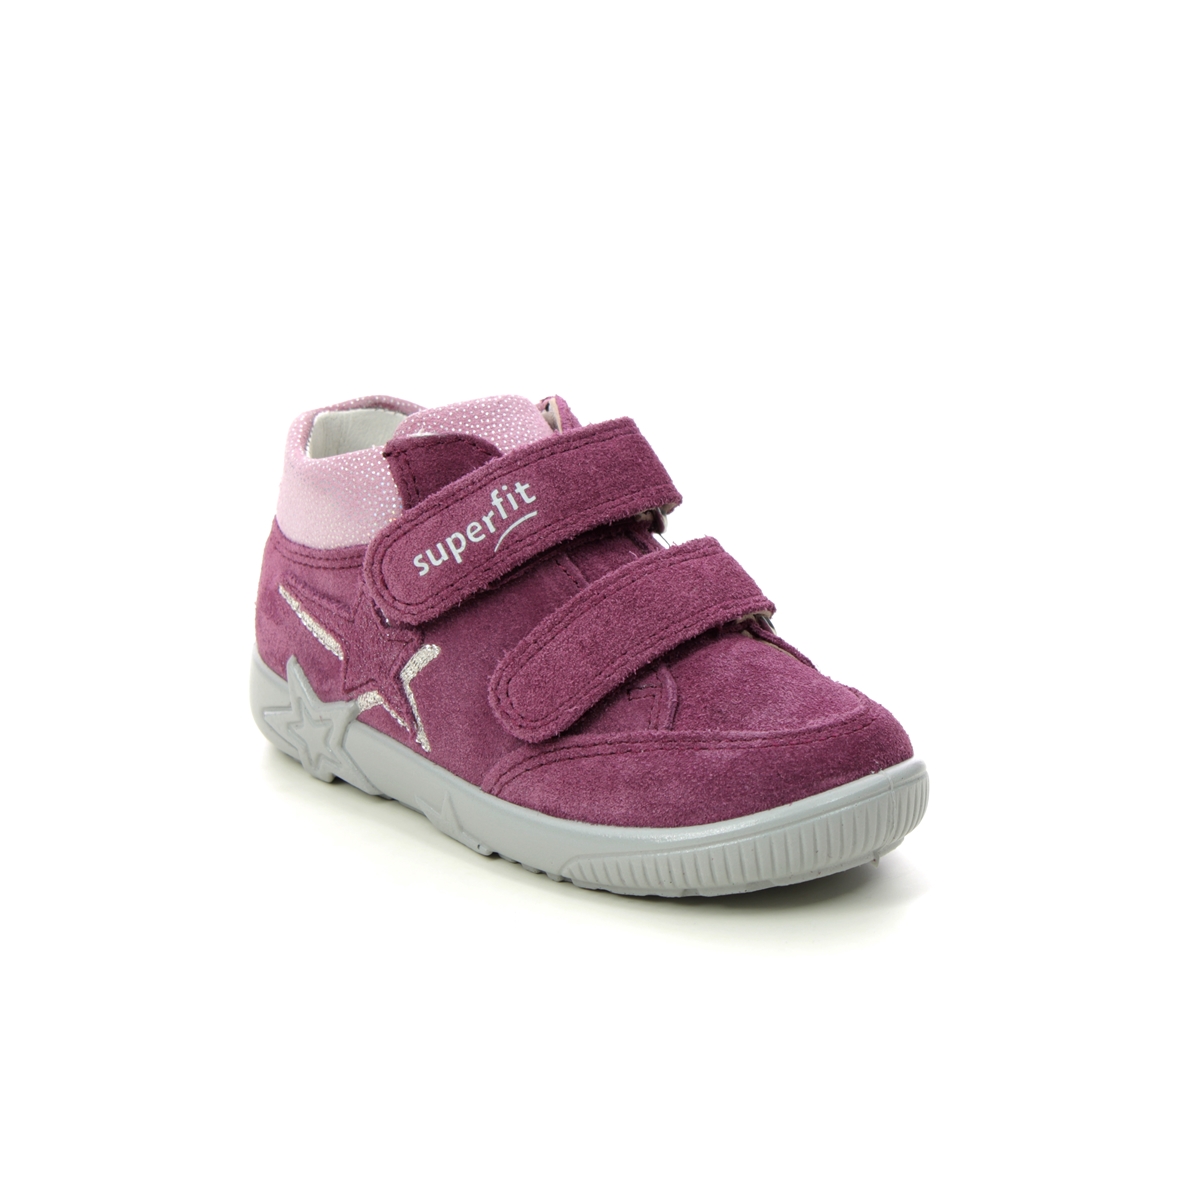 Superfit Starlight Ht 2V Pink Suede Kids First Shoes 1006443-5510 In Size 22 In Plain Pink Suede